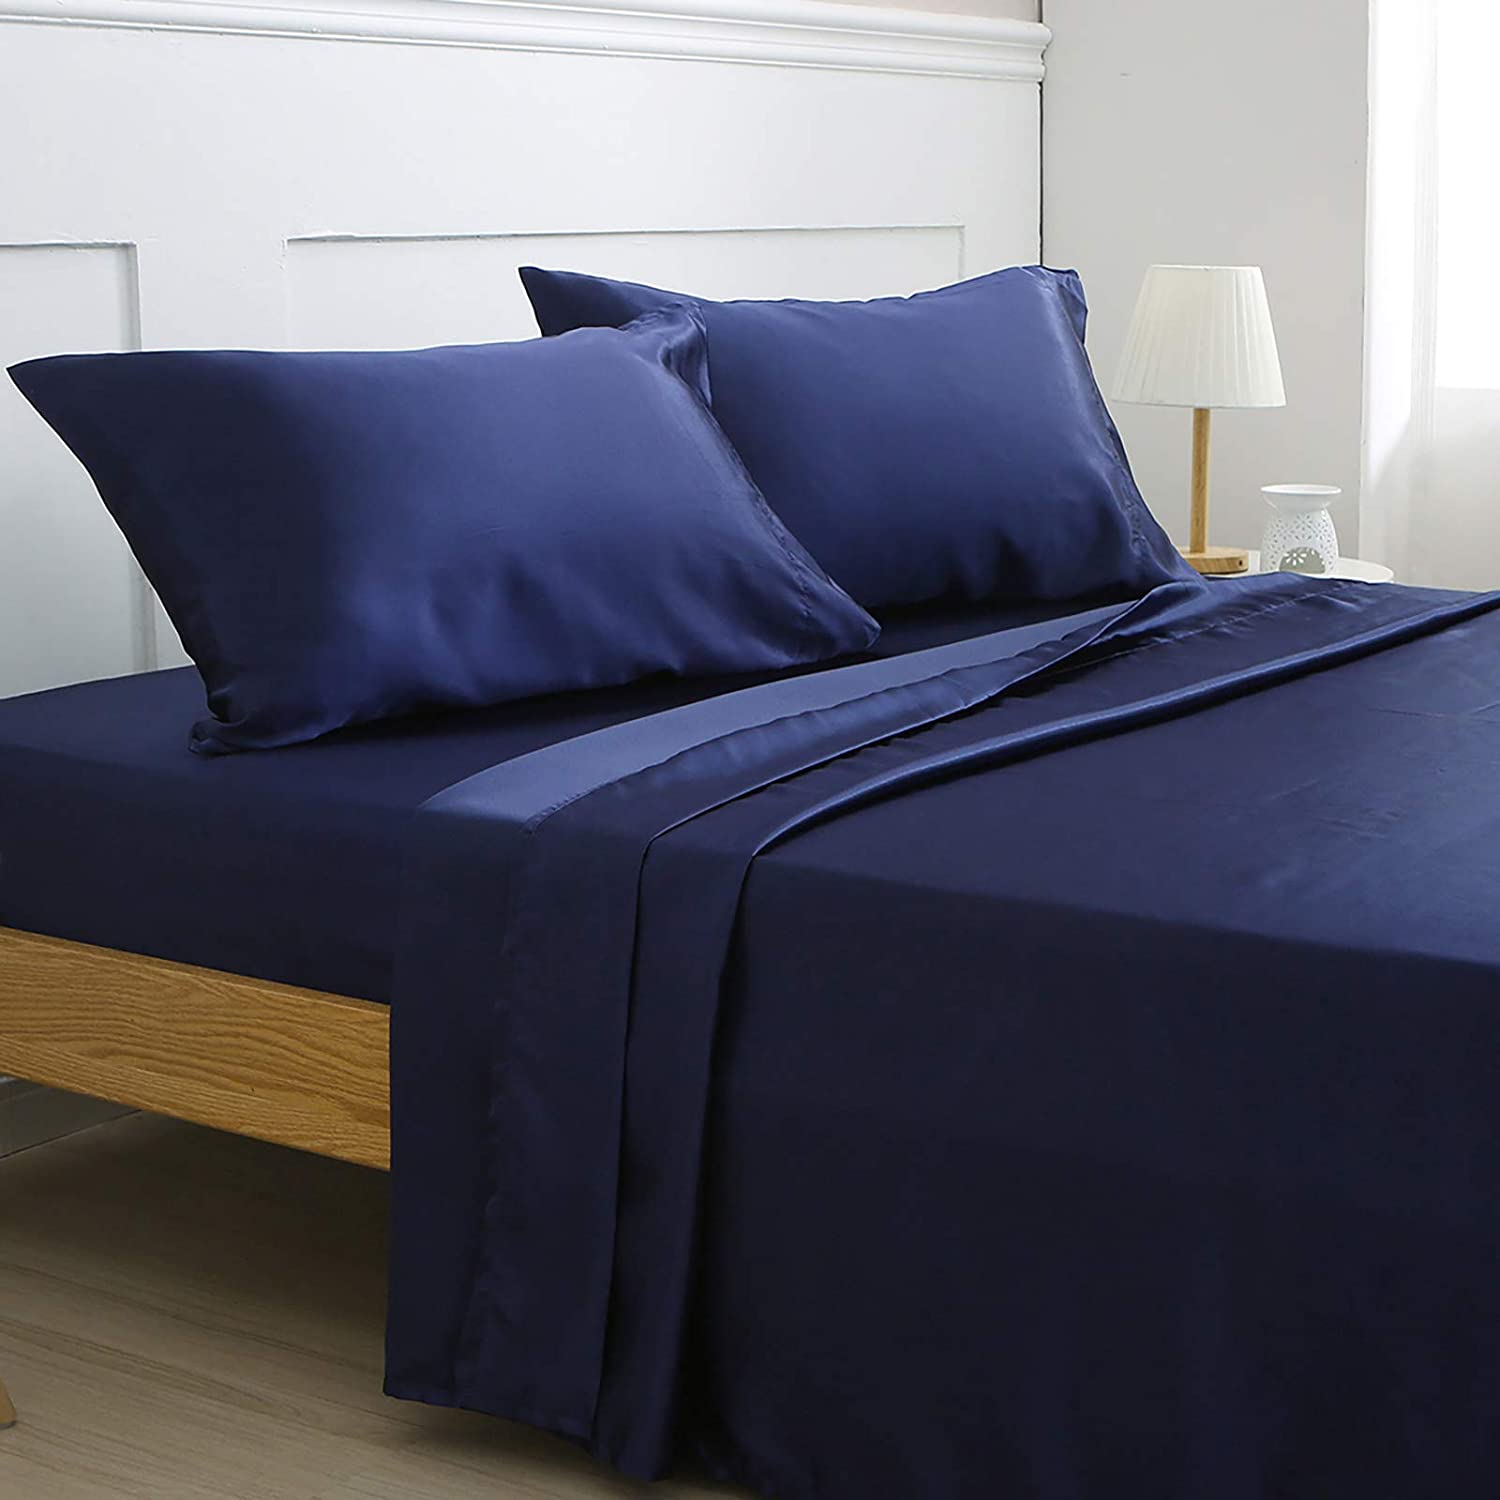 Blue Silky Soft Embroidered Satin Bed Sheet Set King or Queen 